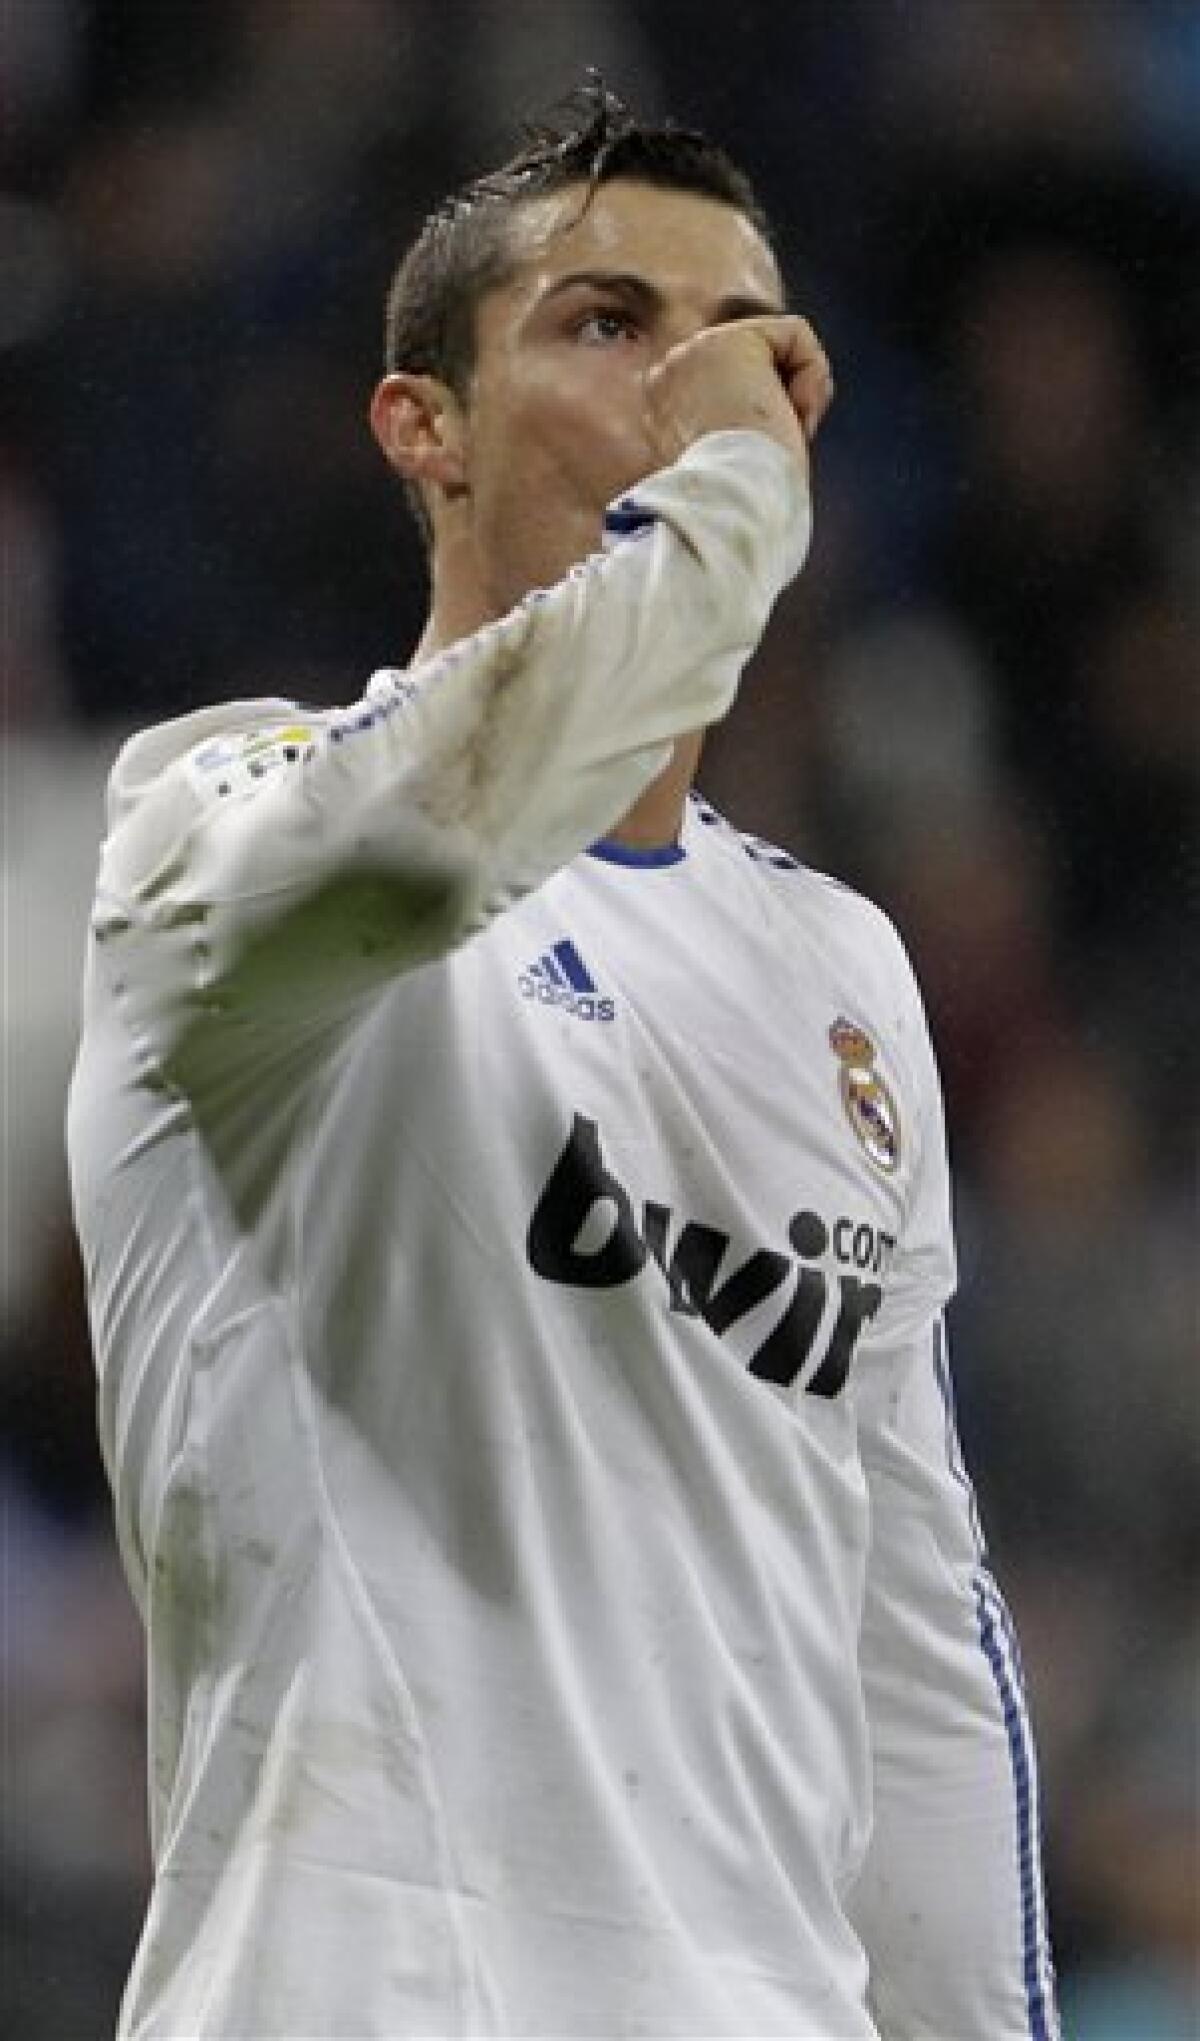 Real Madrid's Cristiano Ronaldo from Portugal reacts after scoring against Levante during a Spanish Copa del Rey soccer match at the Bernabeu stadium in Madrid, Wednesday Dec. 22, 2010.(AP Photo/Paul White)